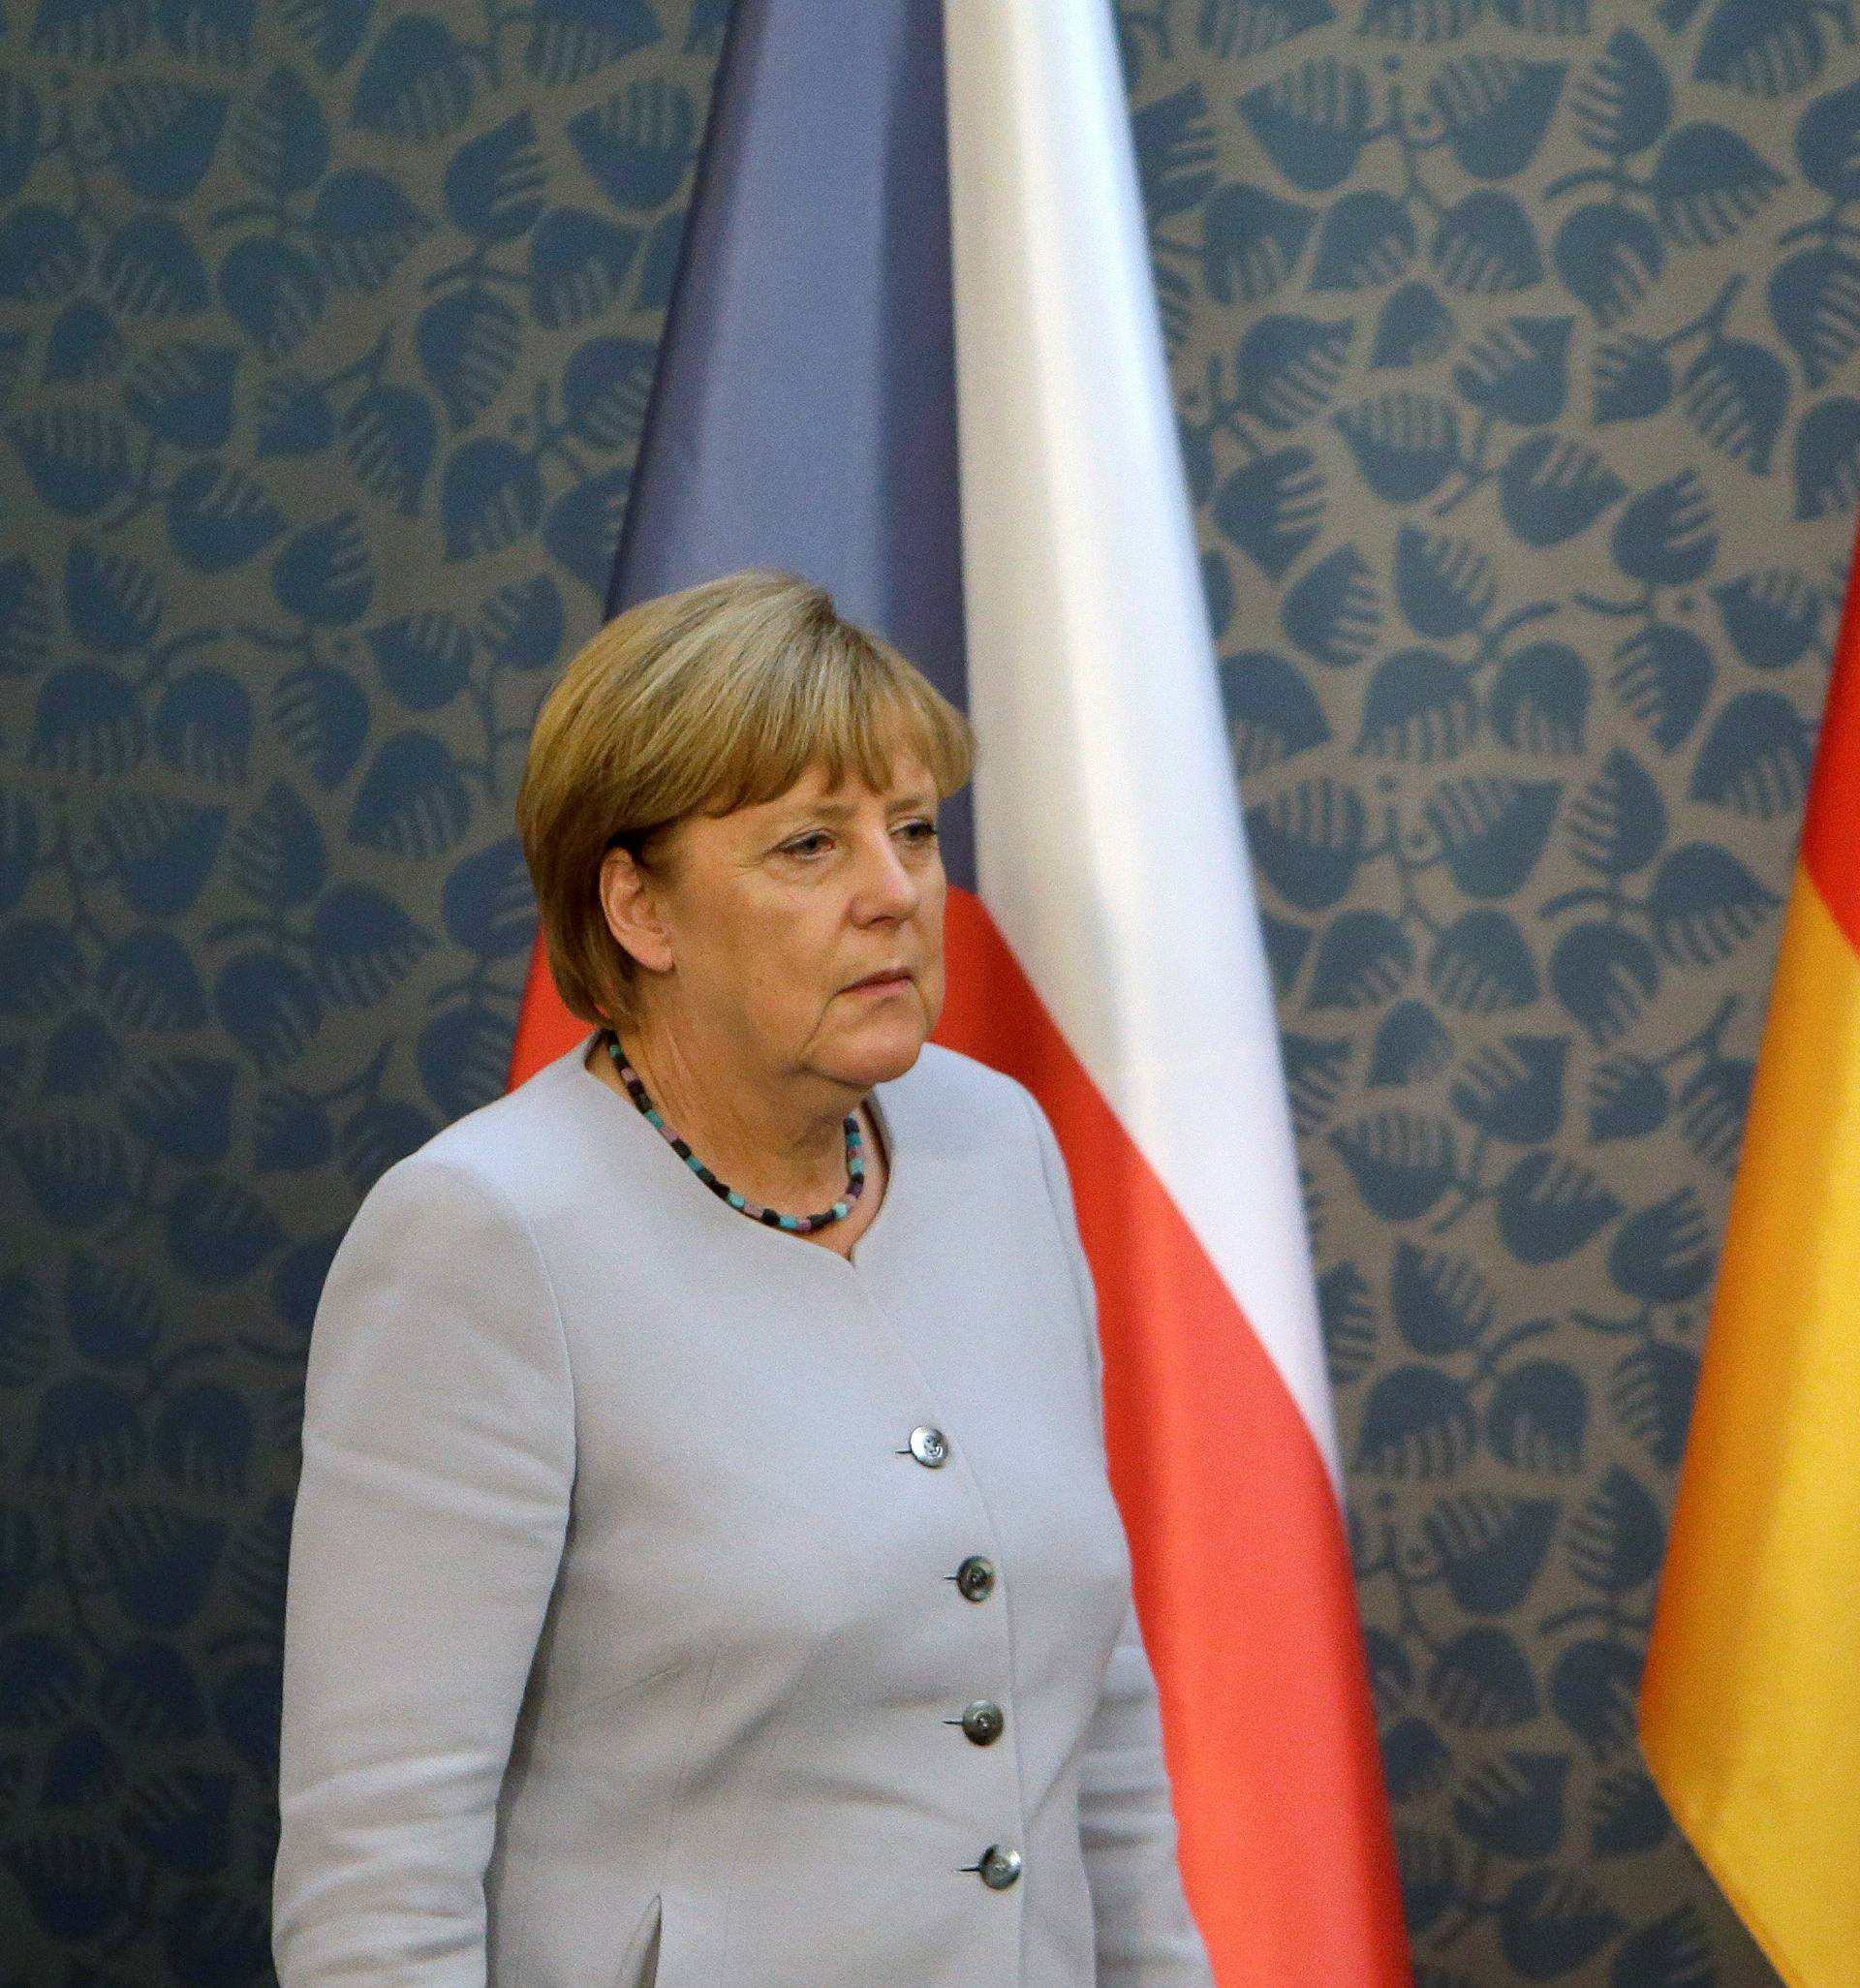 Merkel arrives at a news conference at Czech government headquarters in Prague